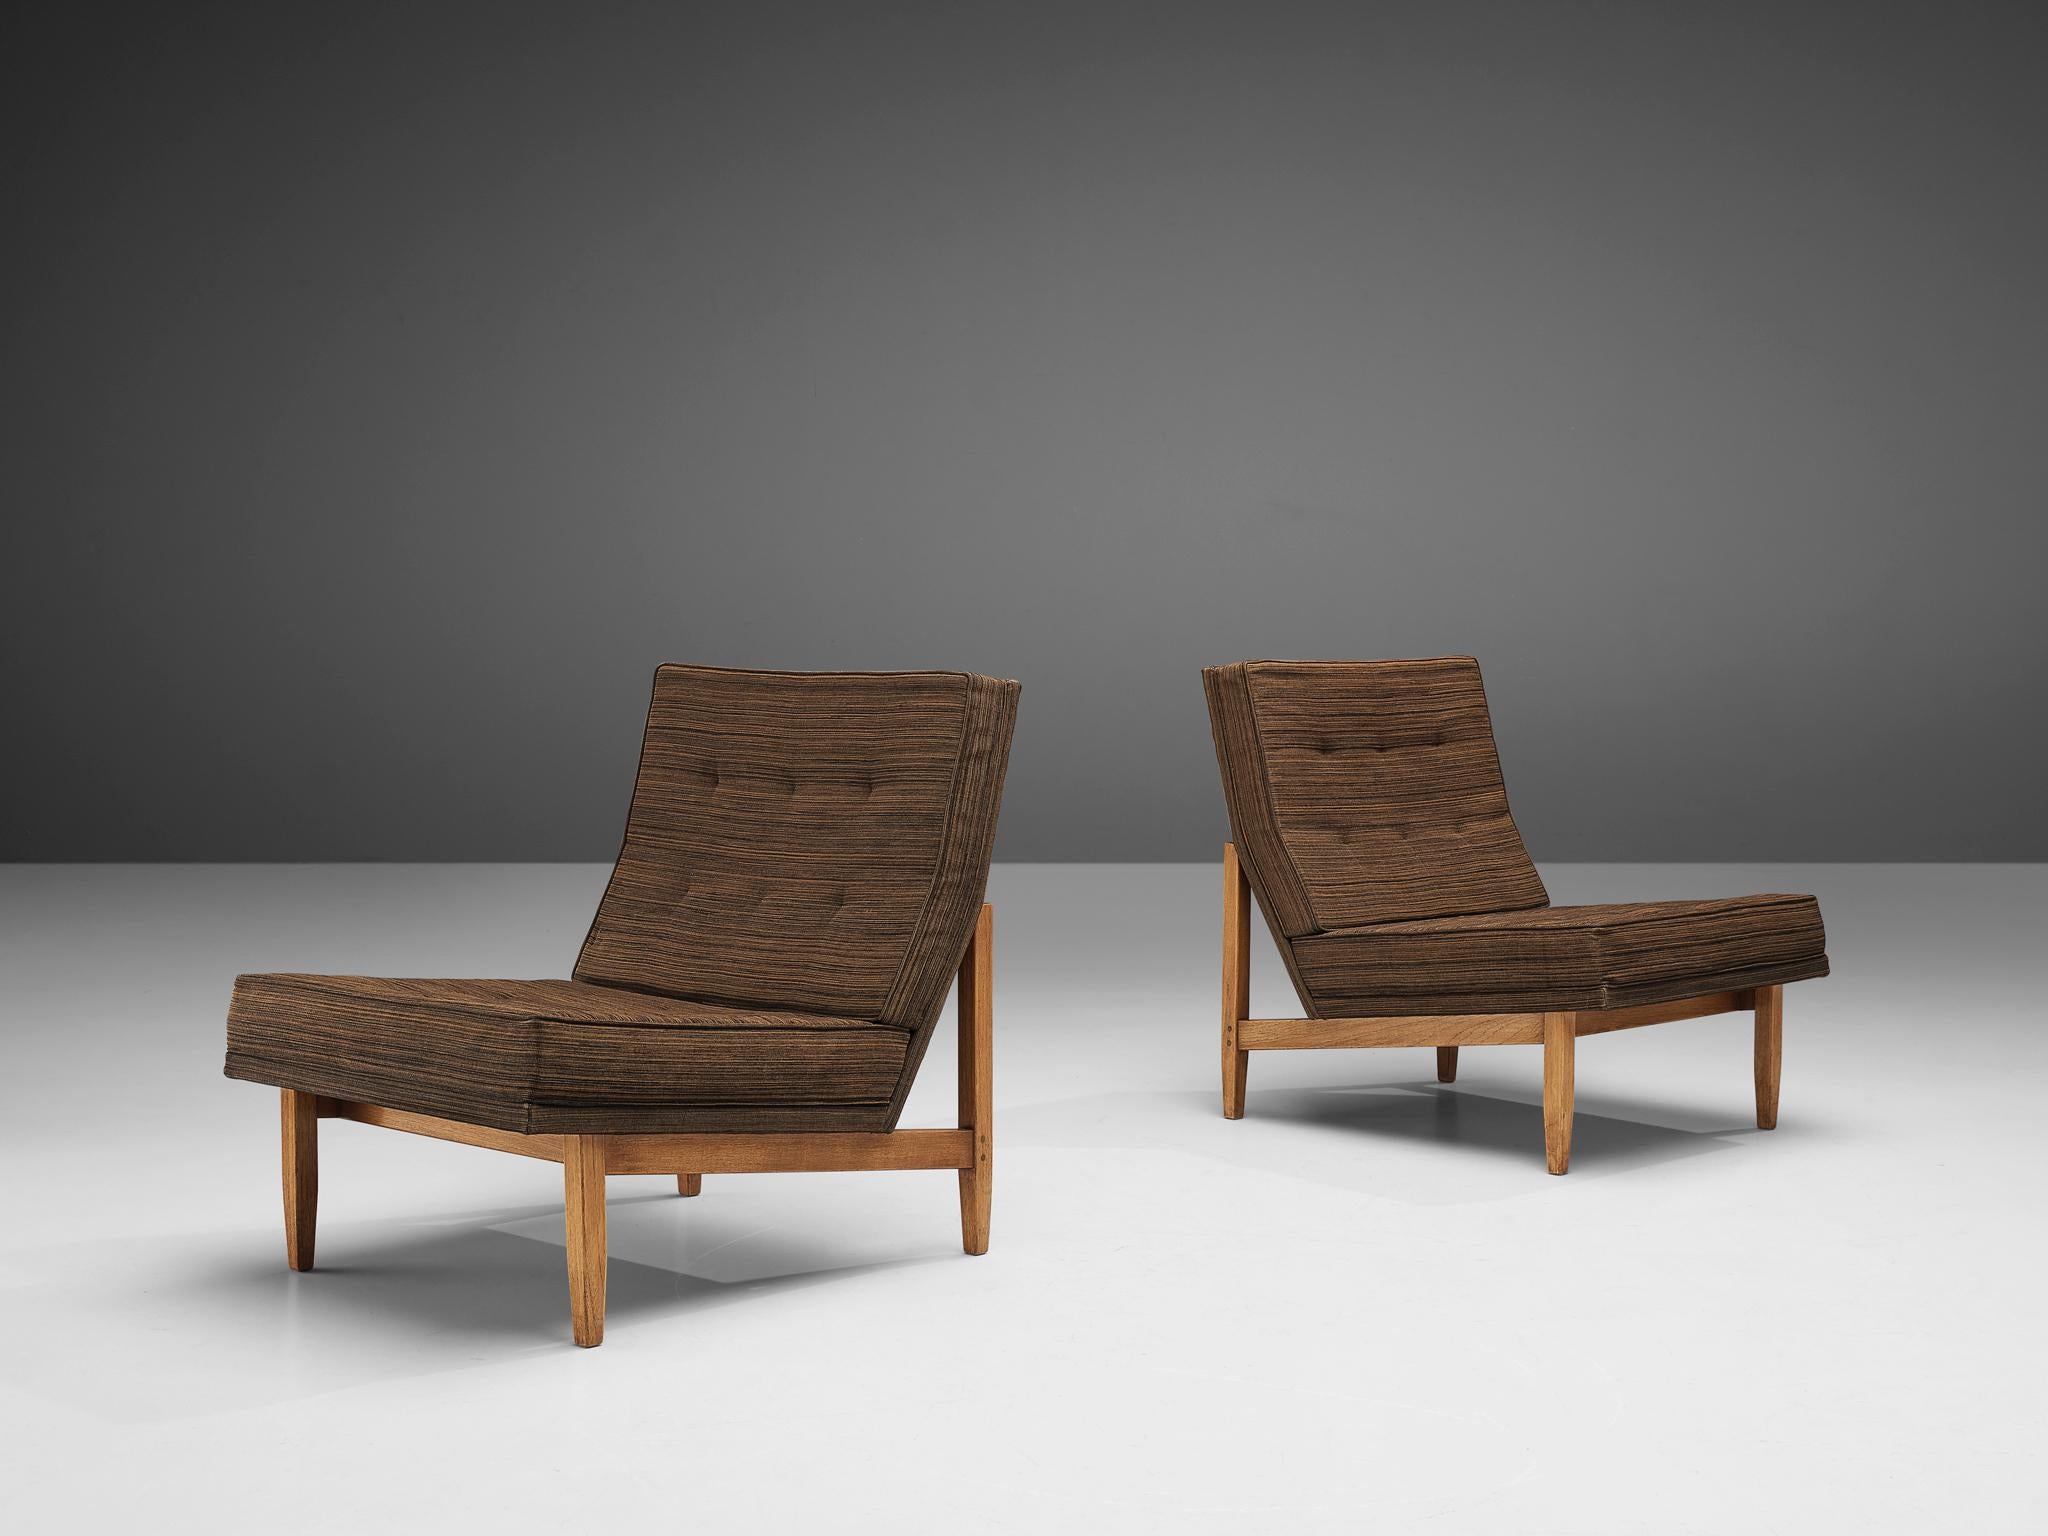 Florence Knoll for Knoll International, lounge chairs model '51', teak, fabric, United States, 1955

Stunning pair of Florence Knoll's parallel bar lounge chairs model '51'. The frame, made of teak, is armless, but has a sleek form. The angled seat